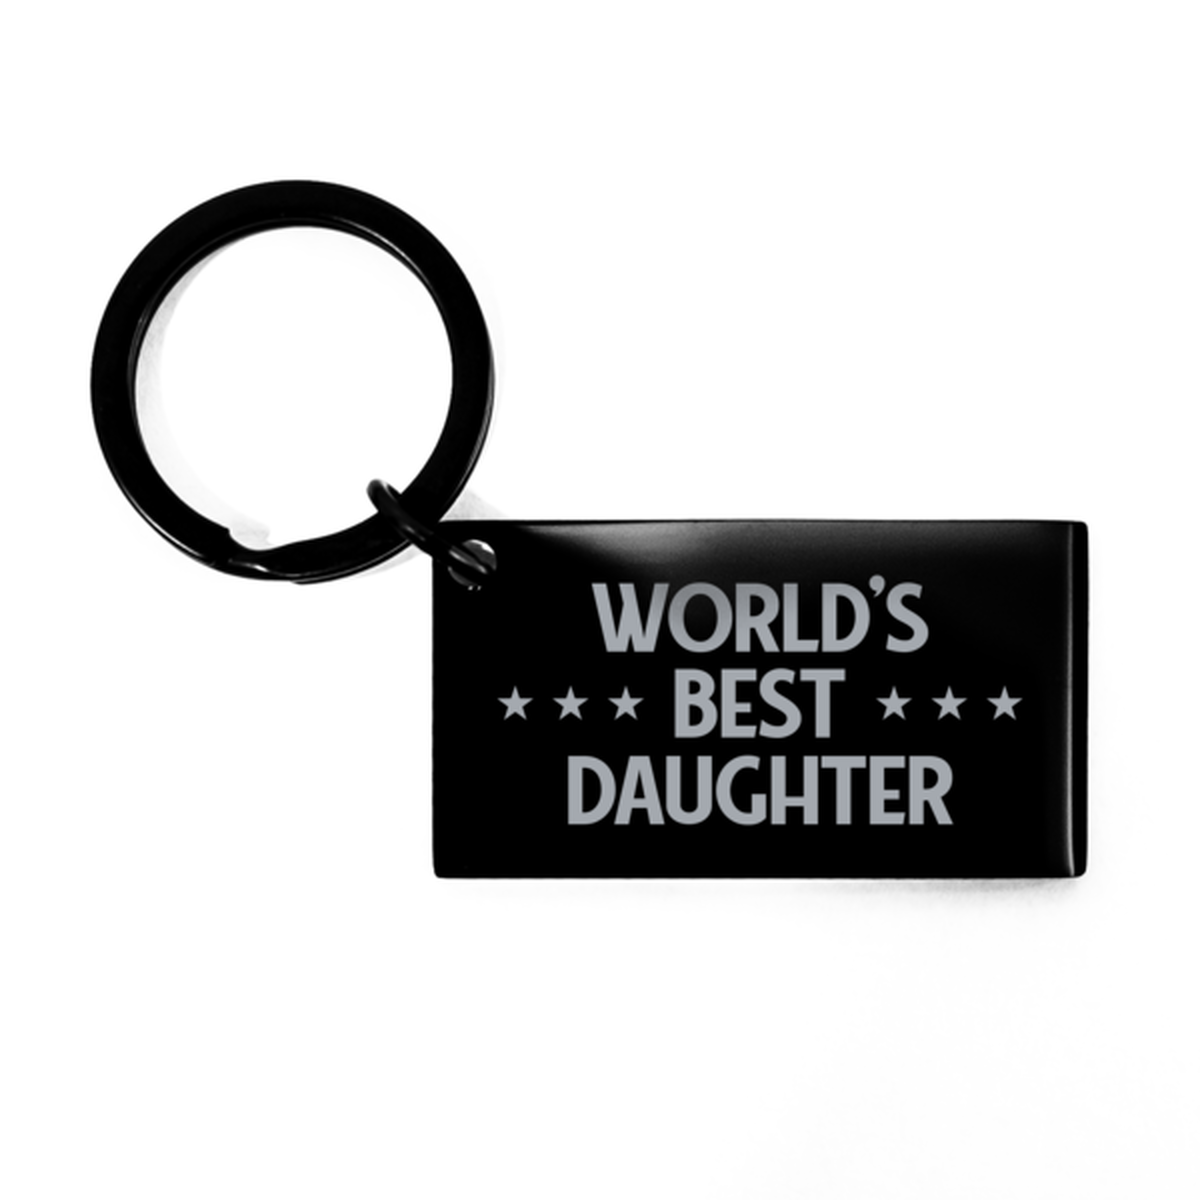 Worlds Best Daughter Gifts, Funny Black Engraved Keychain For Daughter, Birthday Presents For Women